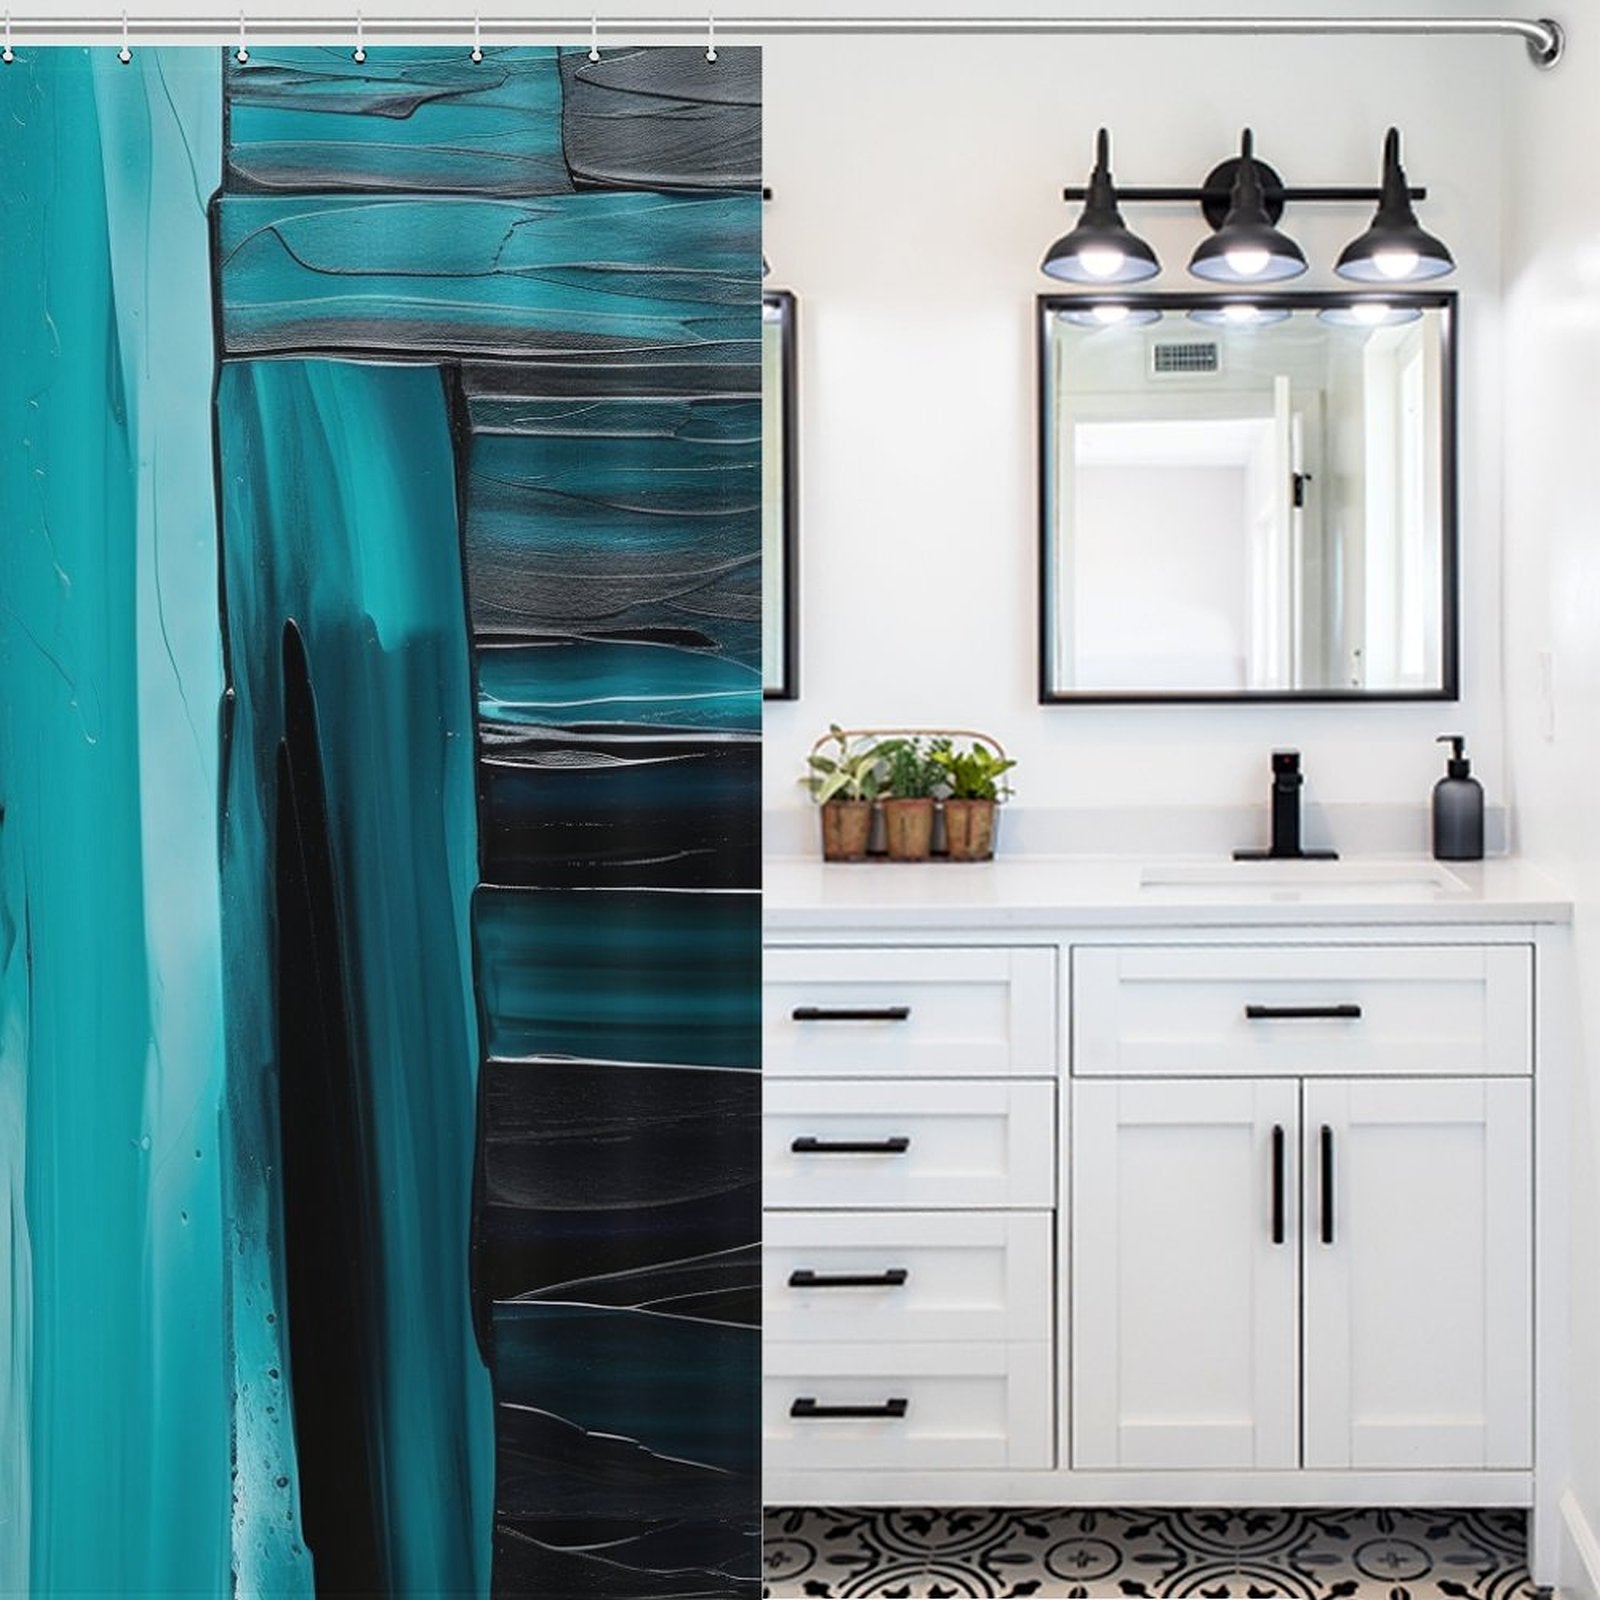 Modern Black White and Turquoise Shower Curtain